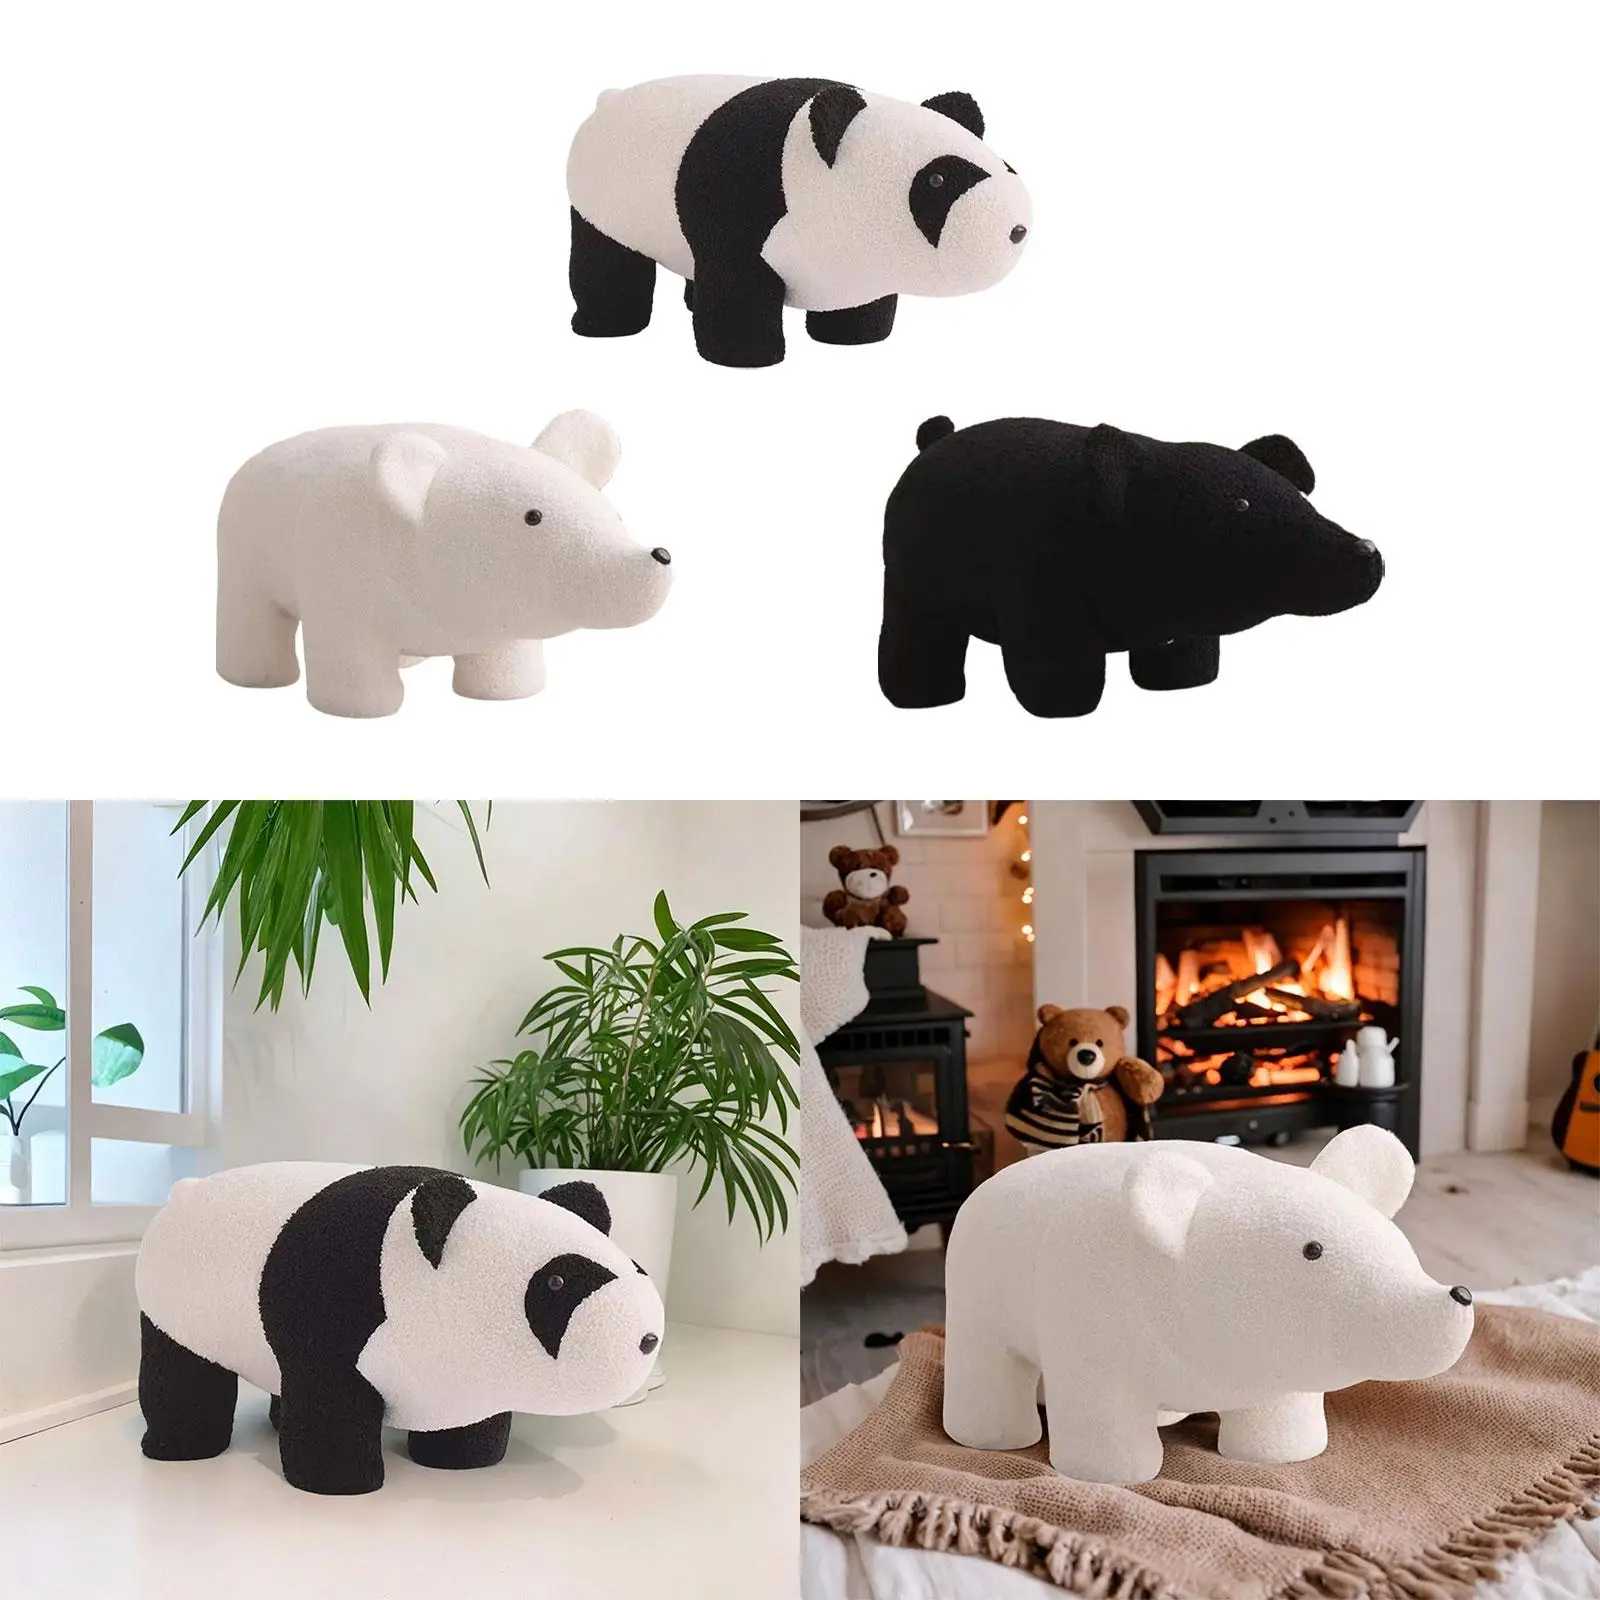 Foot Rest Bedside Kids Gift Anti Slip Cute Animal Footstools Animal Shaped Foot Stool Small Footstool Ottoman for Home Entryway